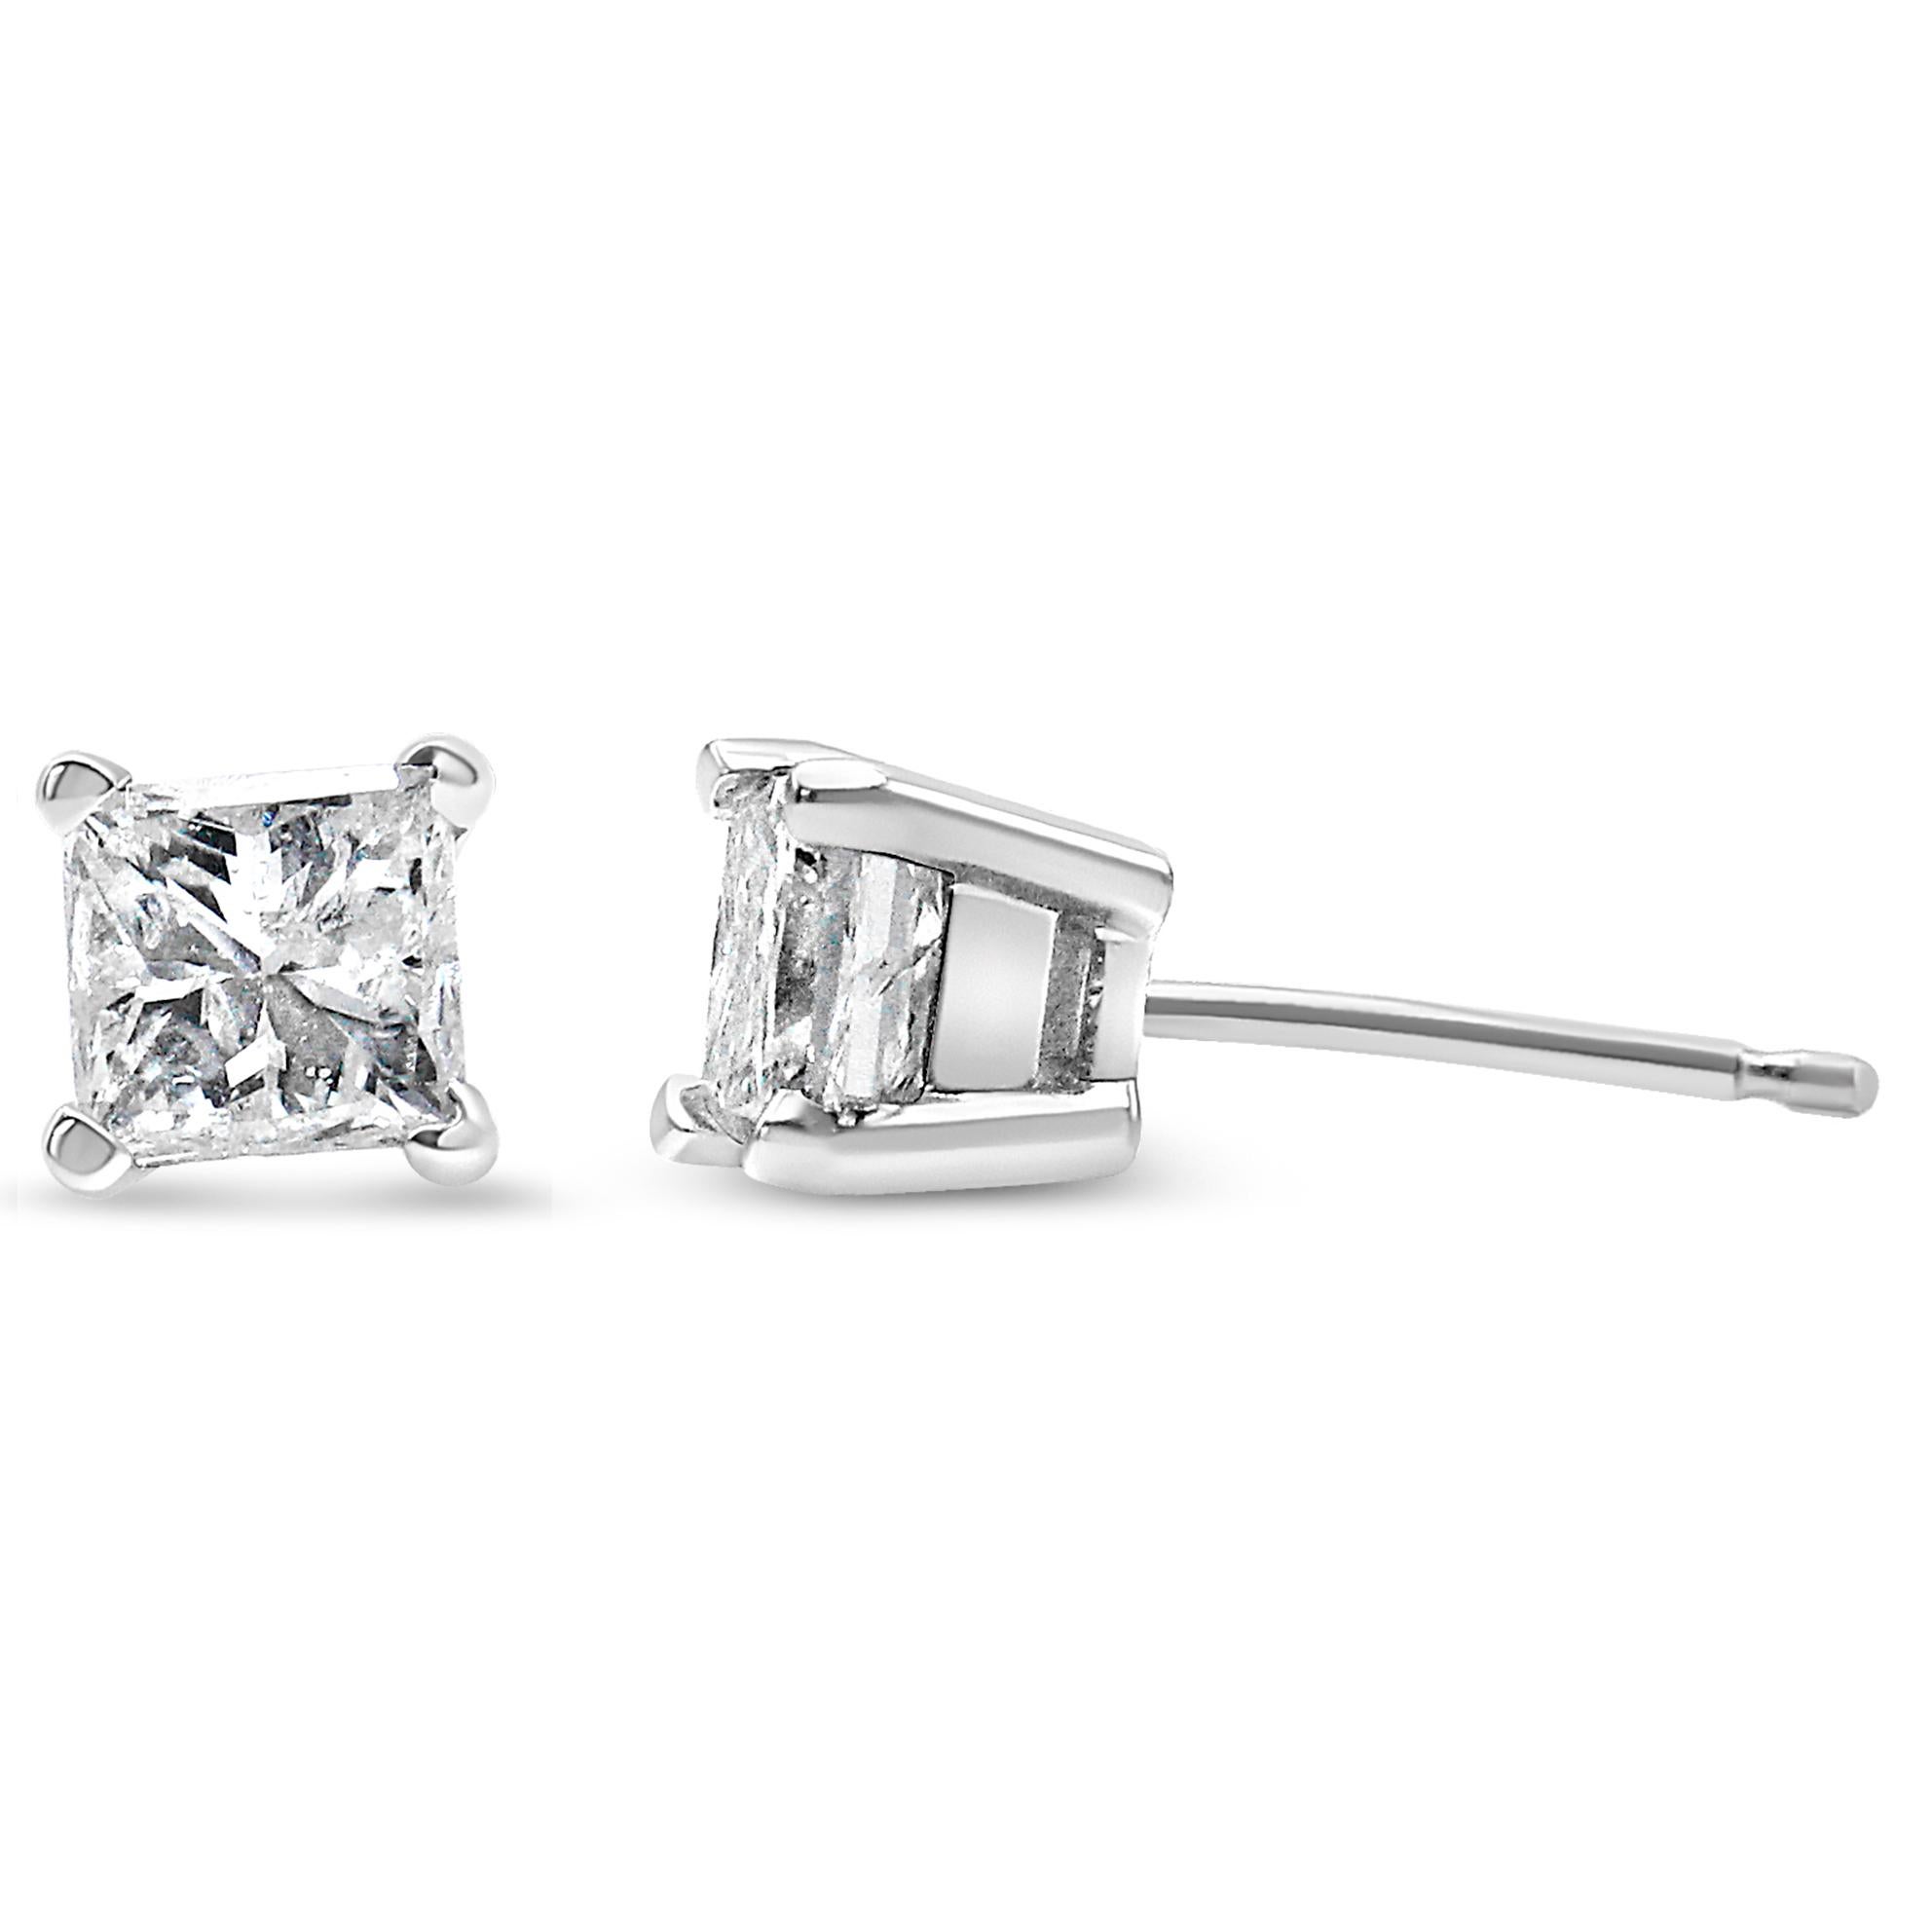 Contemporary AGS Certified 14K White Gold 1.0 Ct Princess-Cut Solitaire Diamond Stud Earrings For Sale